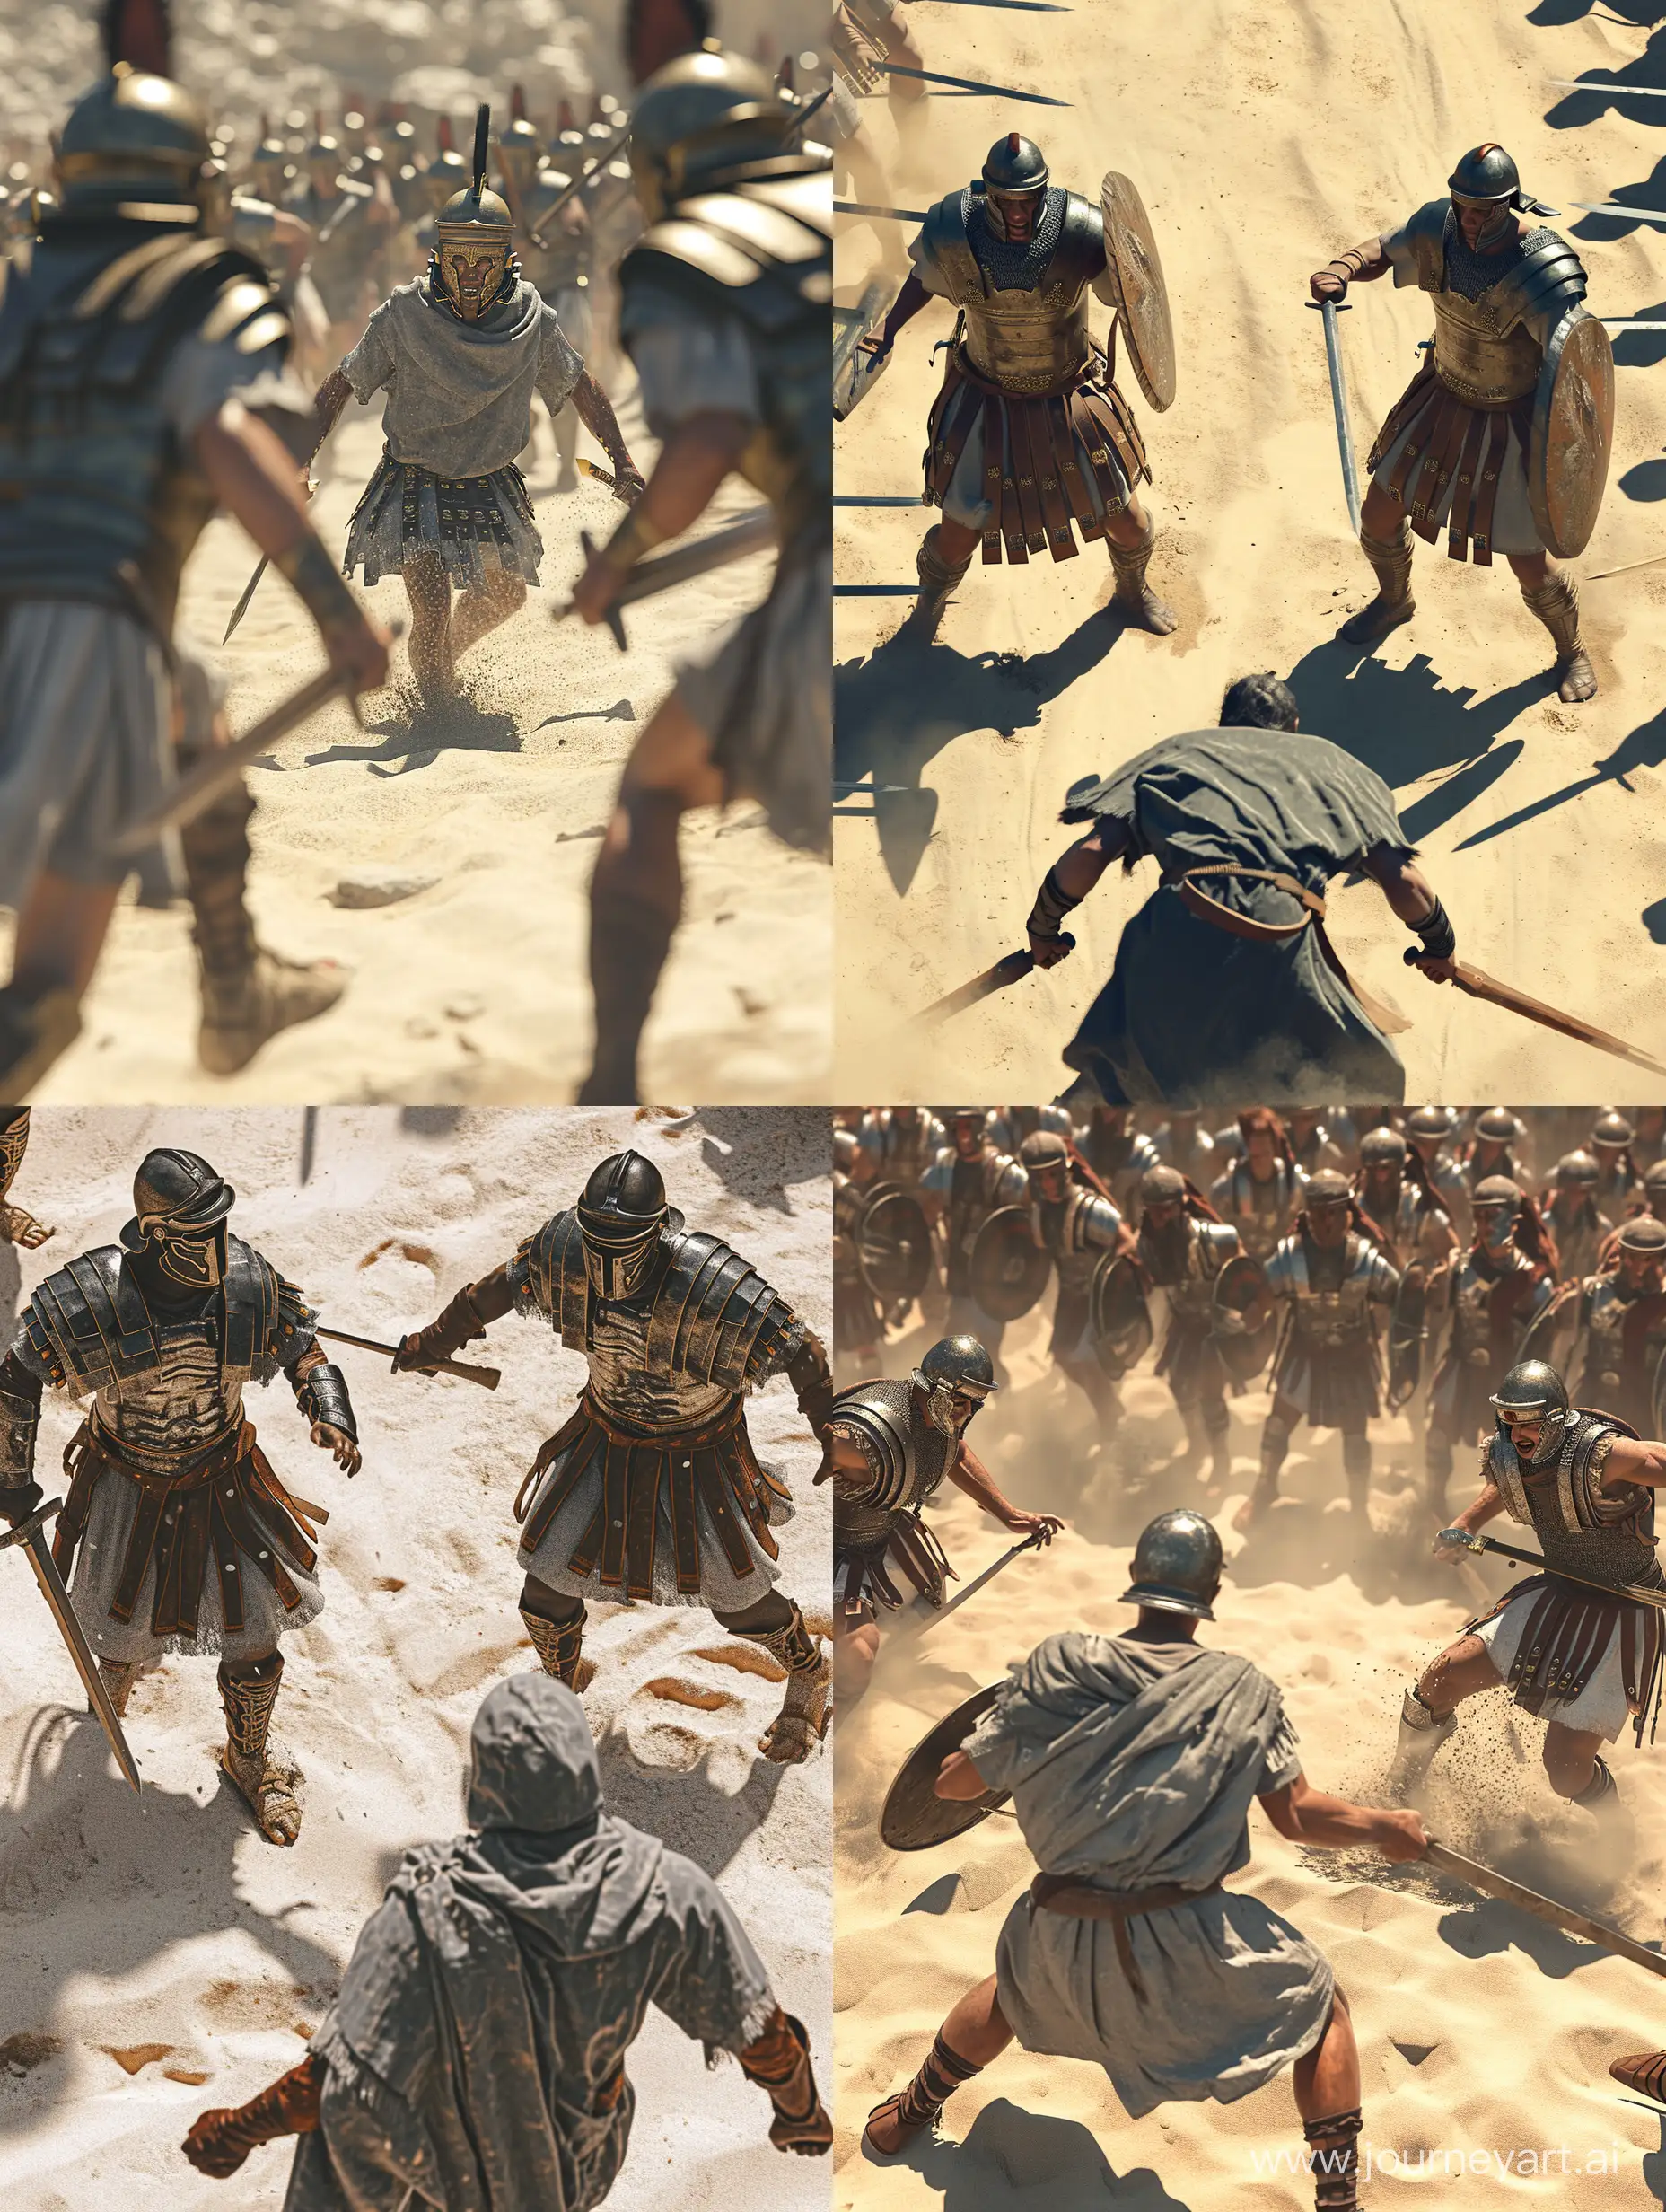 Epic-Battle-Scene-Roman-Legionnaires-Confronting-a-Formidable-Foe-in-High-Detail-16K-Resolution